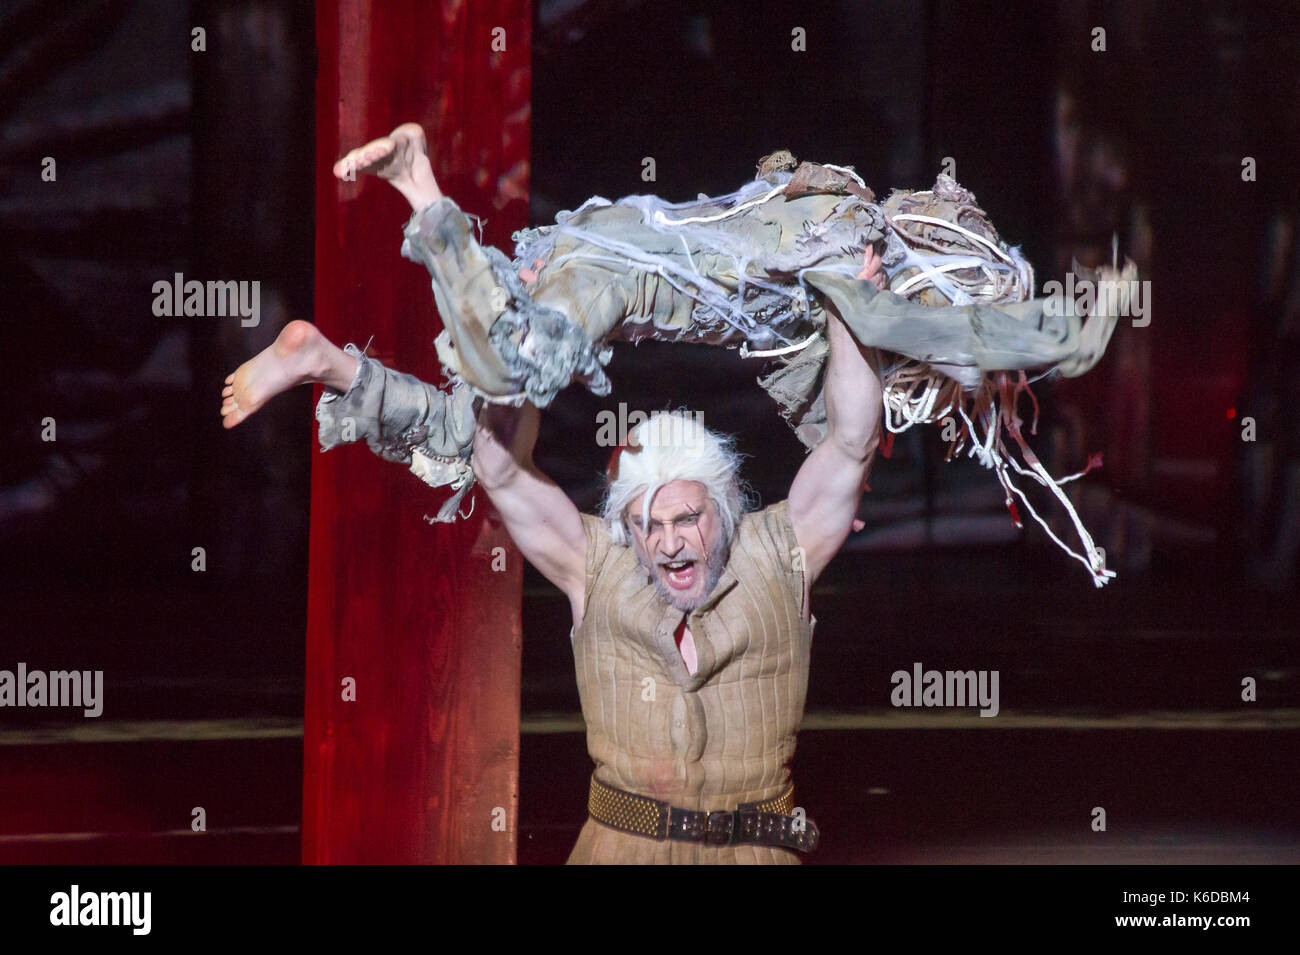 Krzysztof Kowalski as Geralt of Rivia during a media rehearsal of The Witcher musical in Music Theatre in Gdynia, Poland 12 September 2017 © Wojciech Strozyk / Alamy Live News Stock Photo